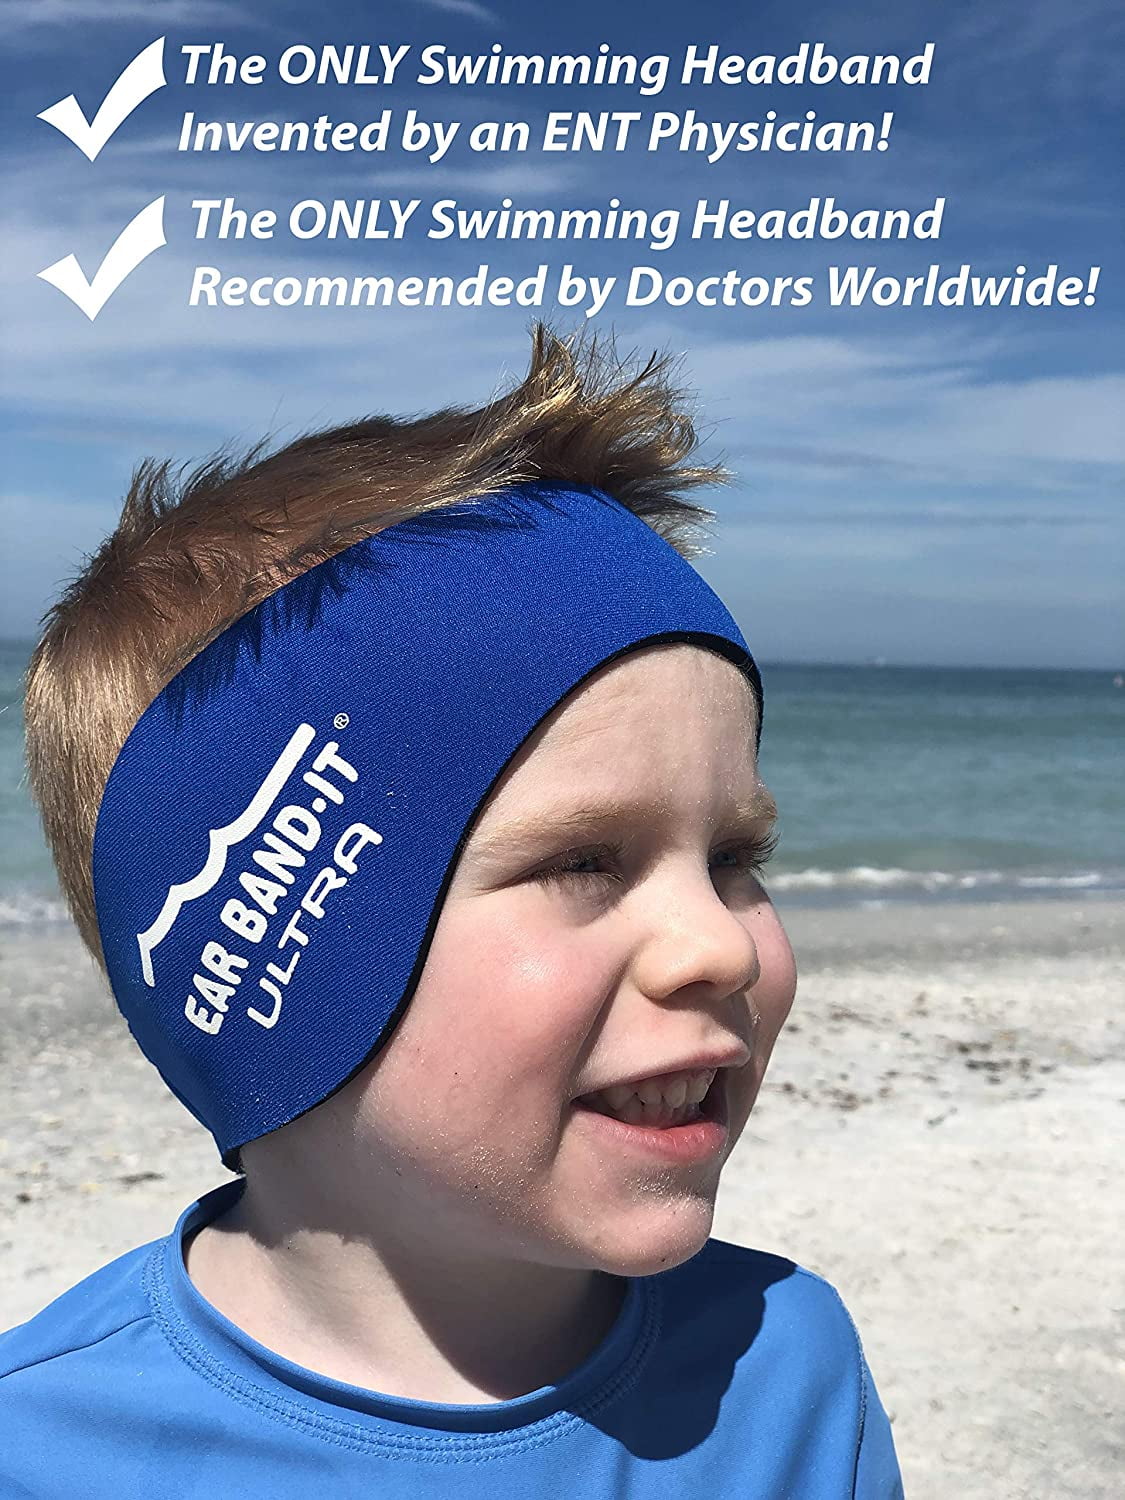 The Original Swimmers Headband Invented by Physician Secure Earplugs Doctor Recommended Hold Ear Plugs in Ear Band-It Swimming Headband 